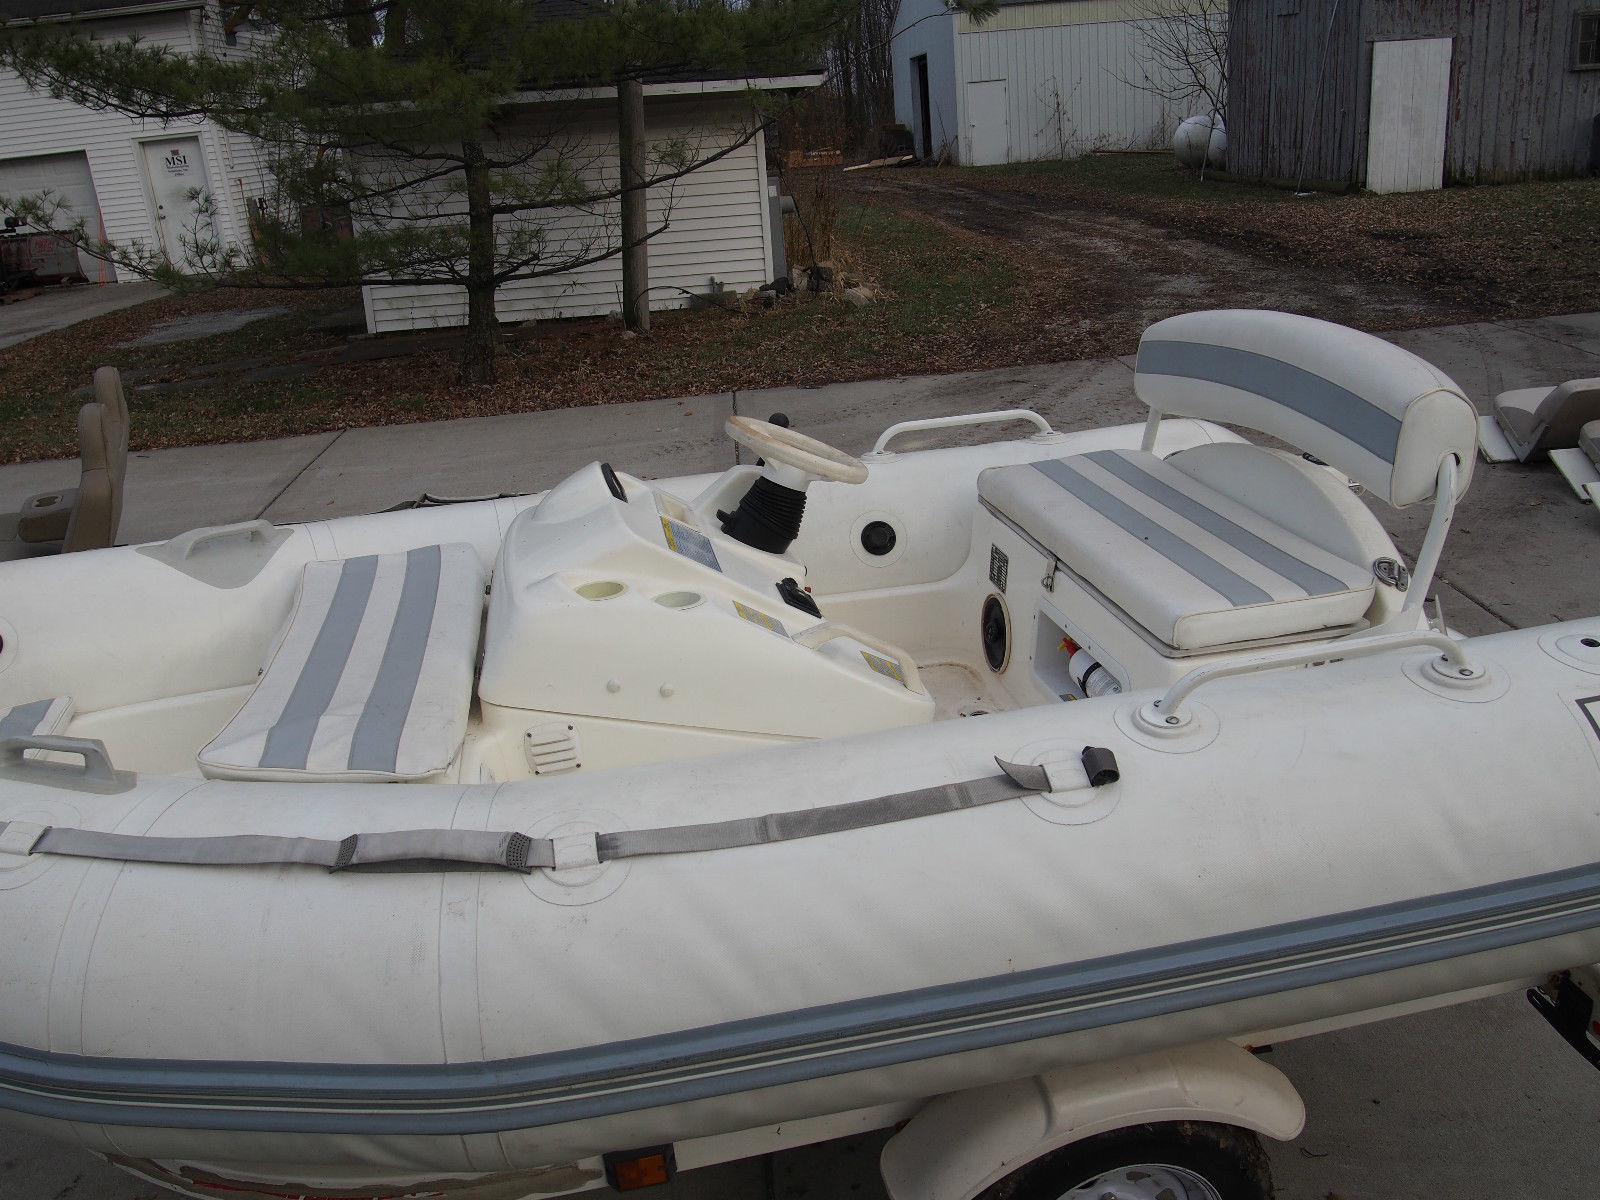 Zodiac Pro Jet 350 2000 for sale for $5,900 - Boats-from 